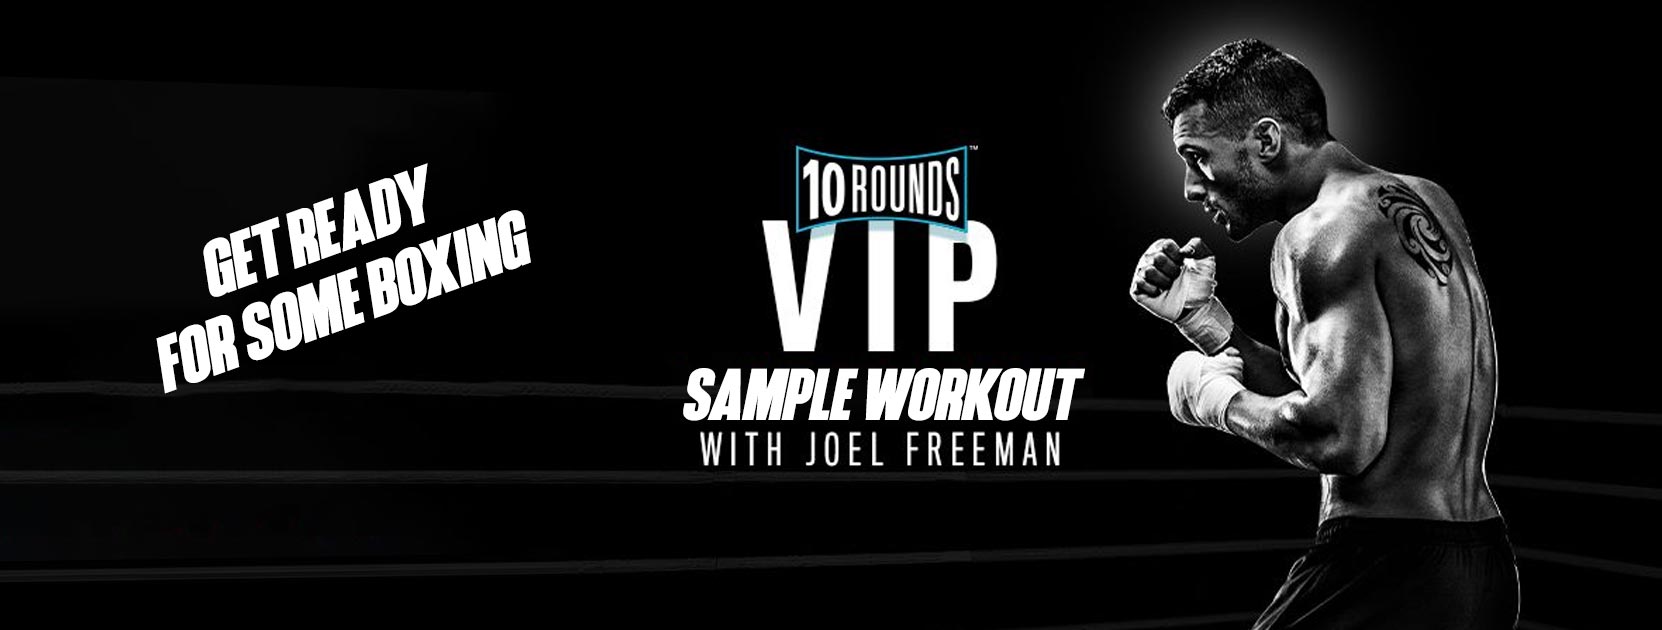 10 Rounds Sample Workout